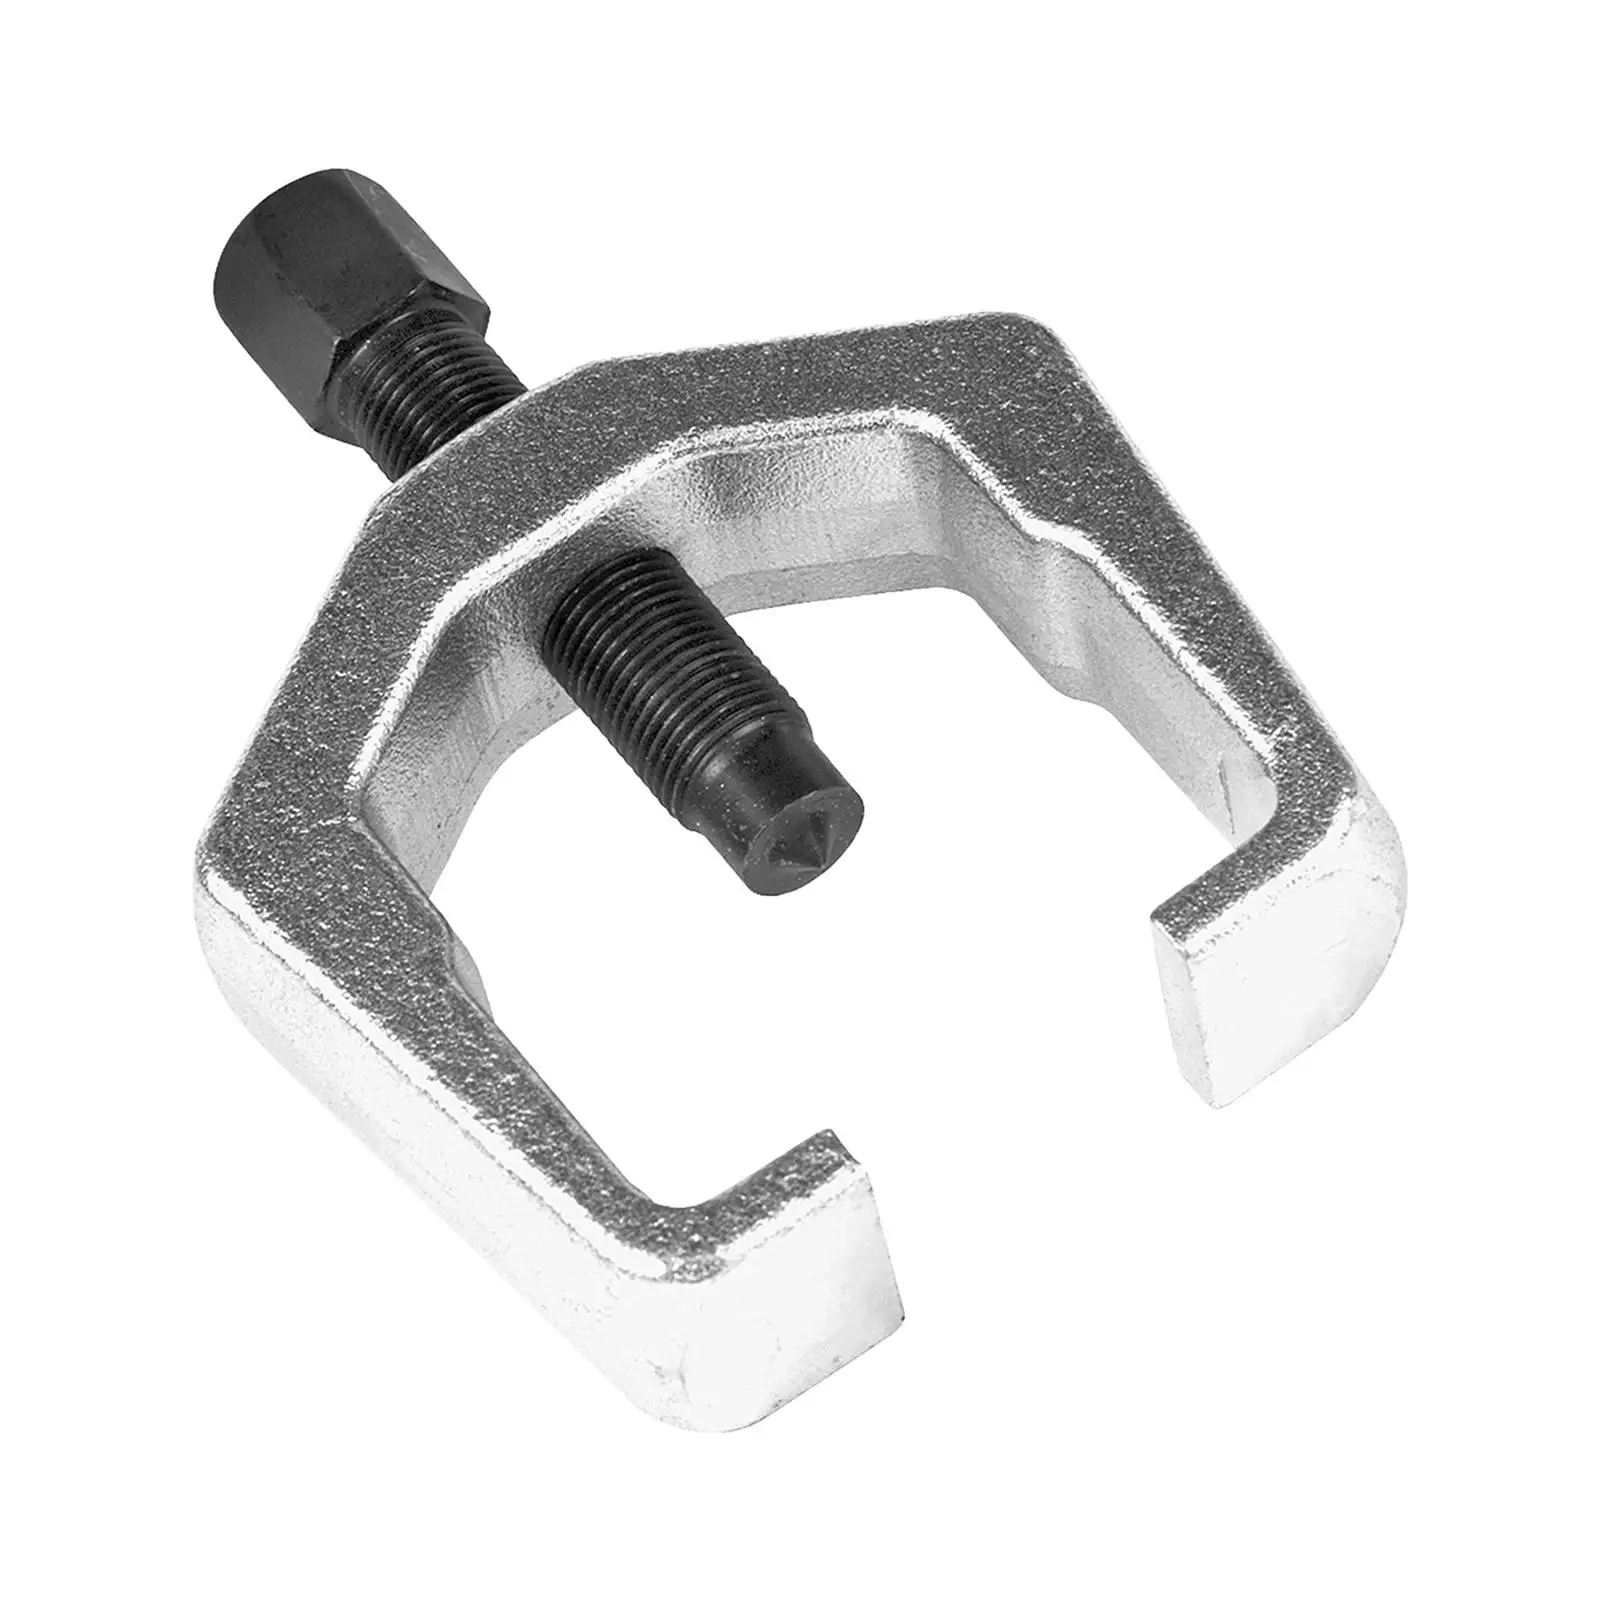 Slack Adjuster Puller Iron 2 Jaw Gear Puller Removal Tool for Gears High Performance Trucks Repair Tool Remove Tool Removal Tool